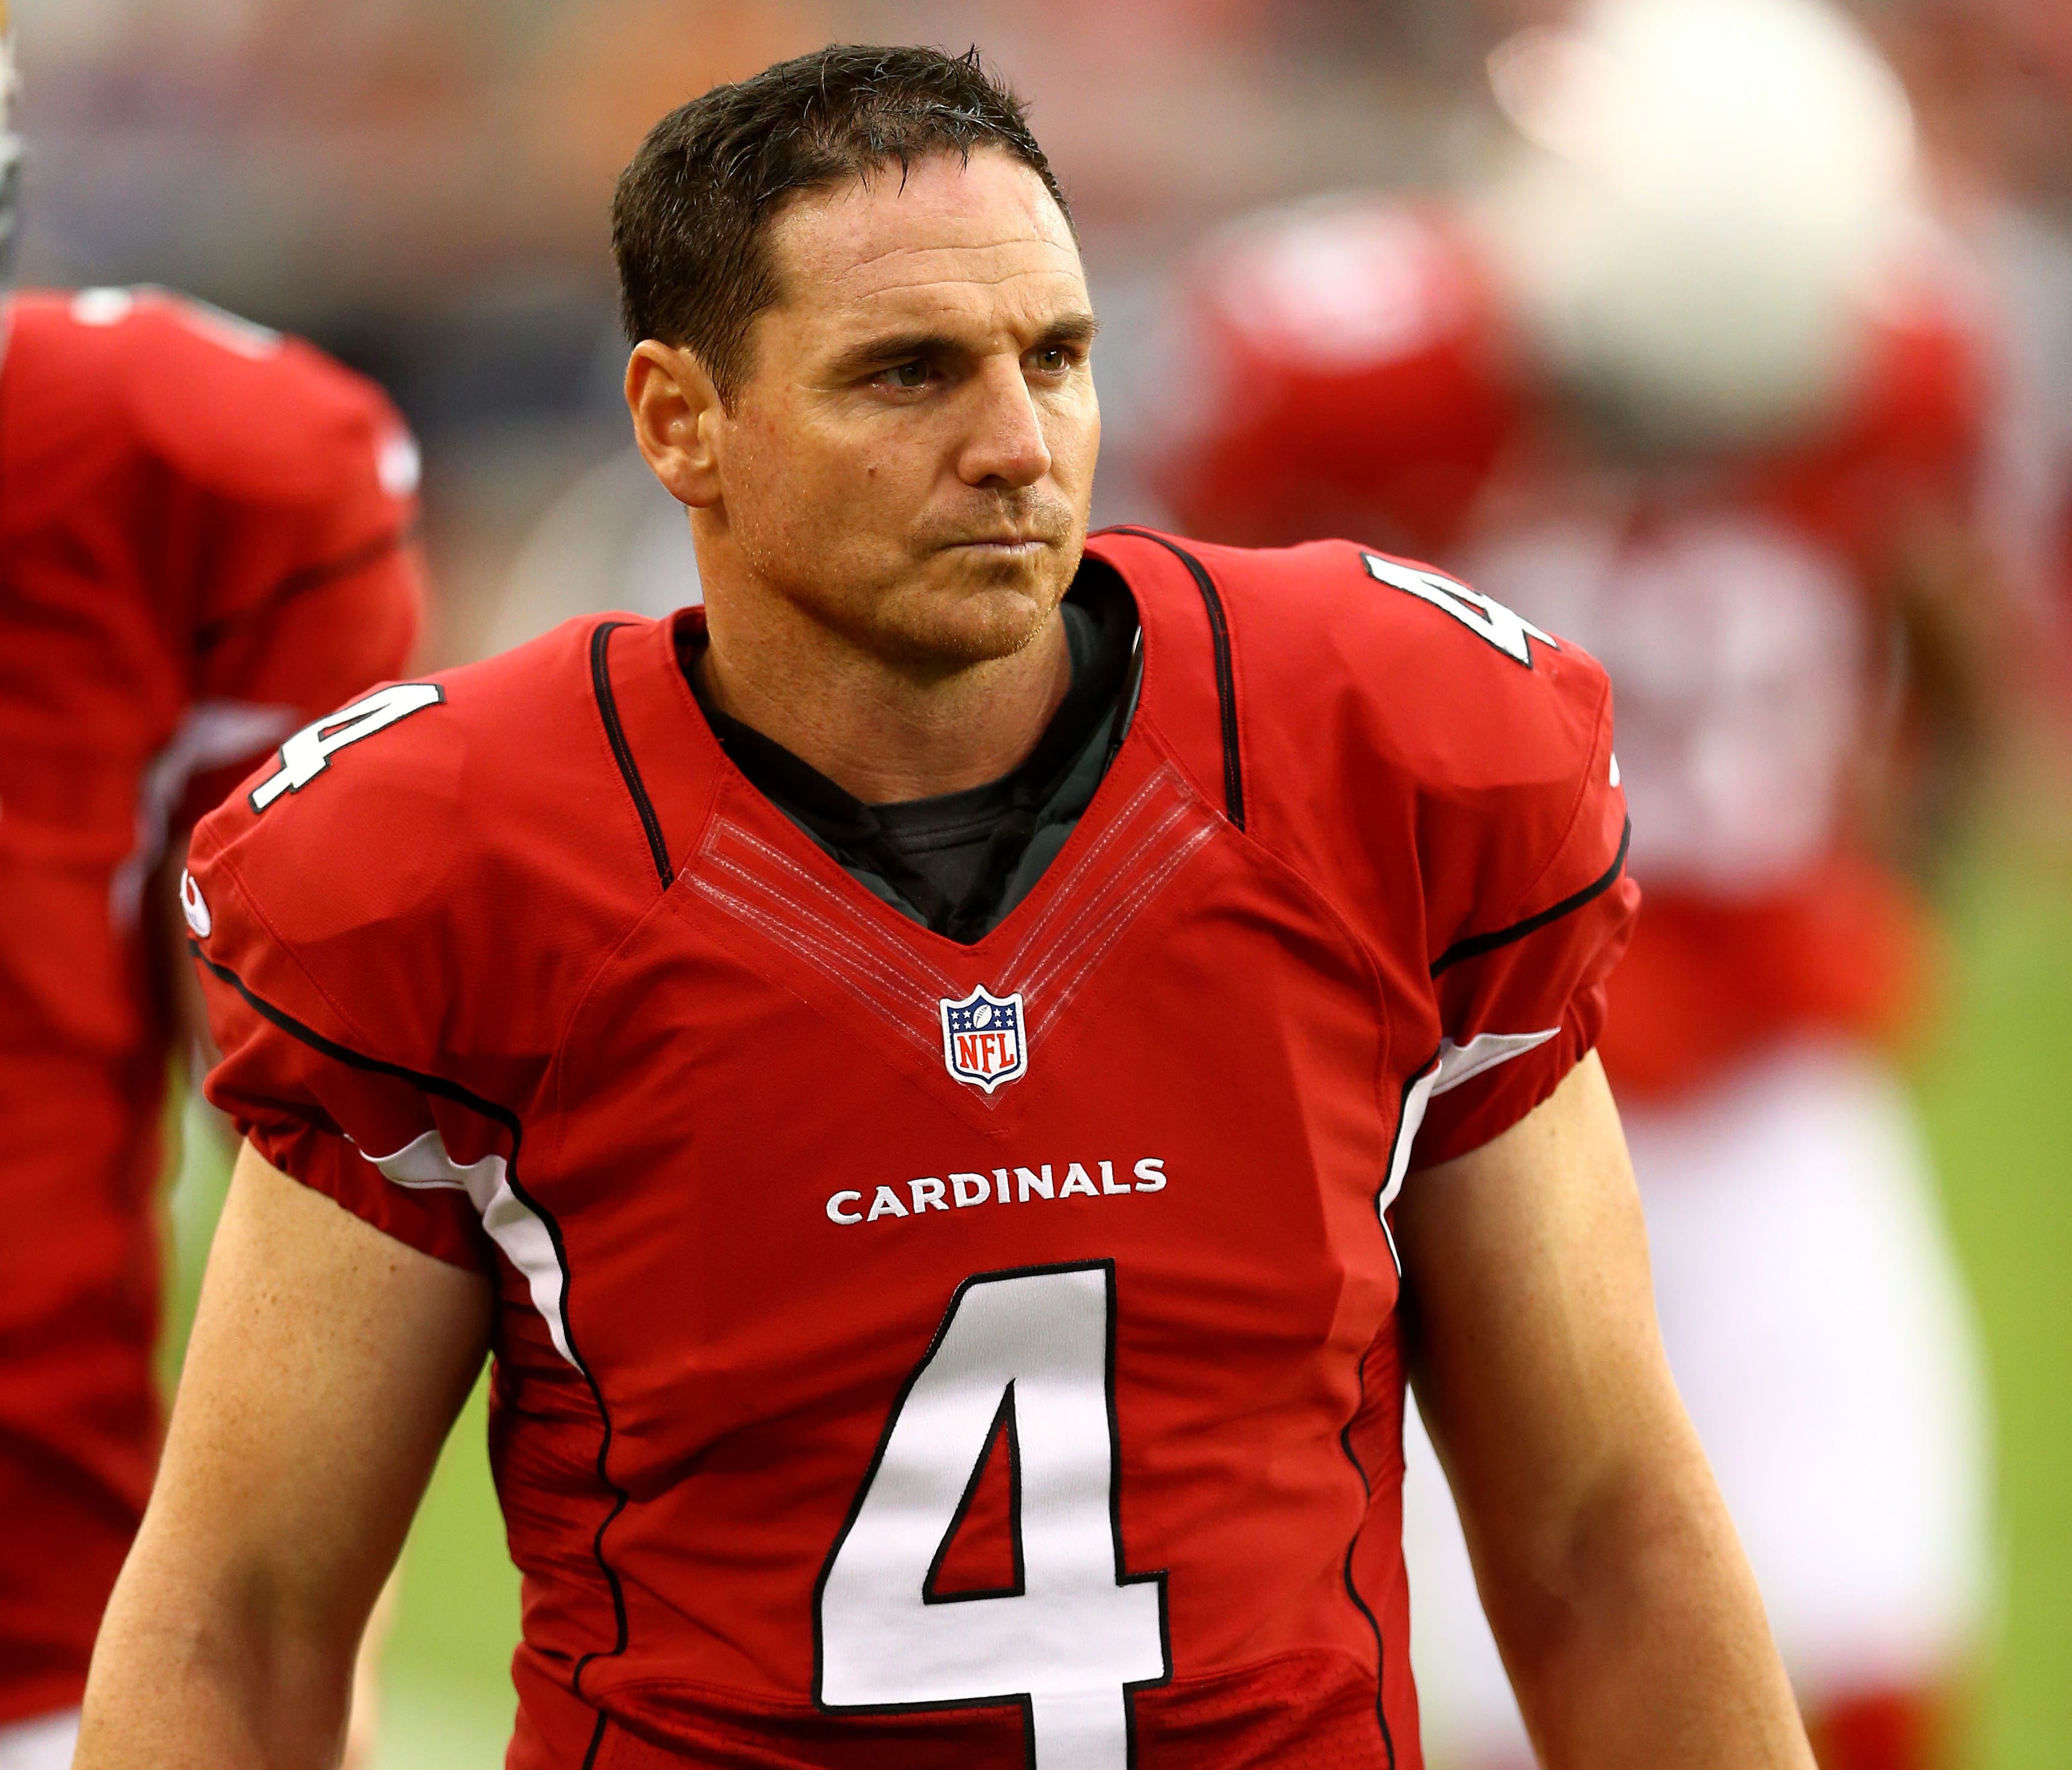 Jay Feely was a kicker in the NFL for 14 years.